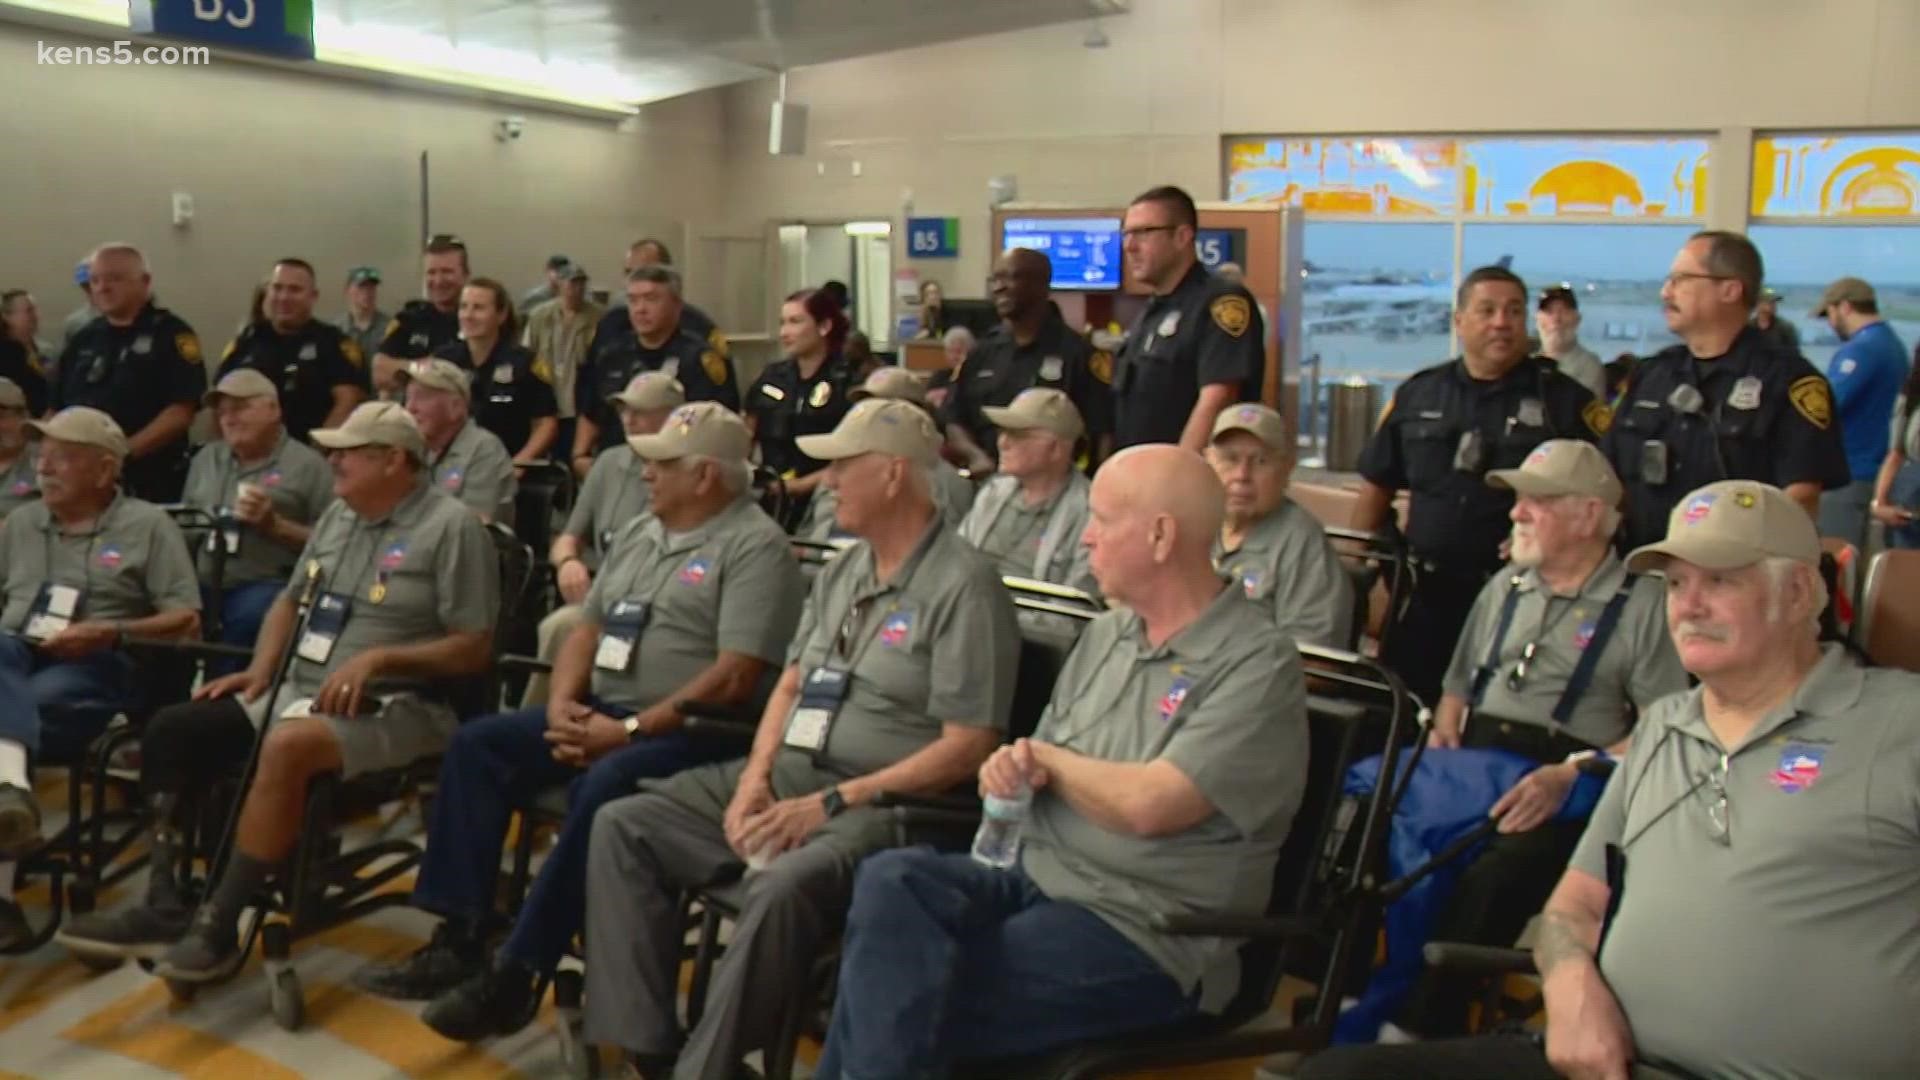 Several veterans are getting ready to board the Honor Flight in route to Washington D.C.